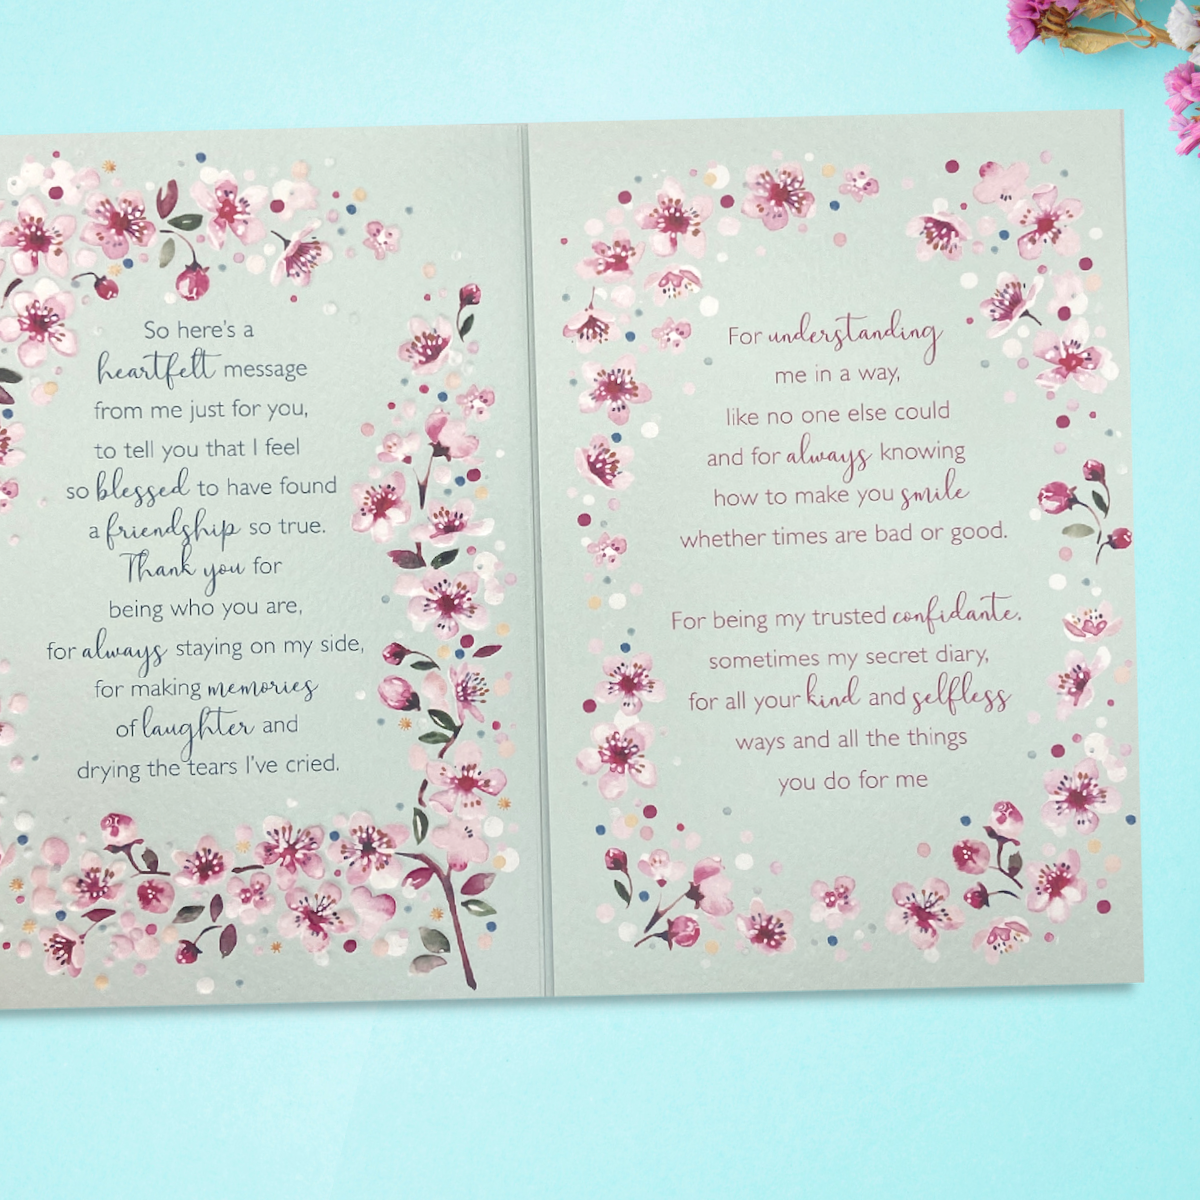 Inside image with two pages of heartfelt verse with floral border